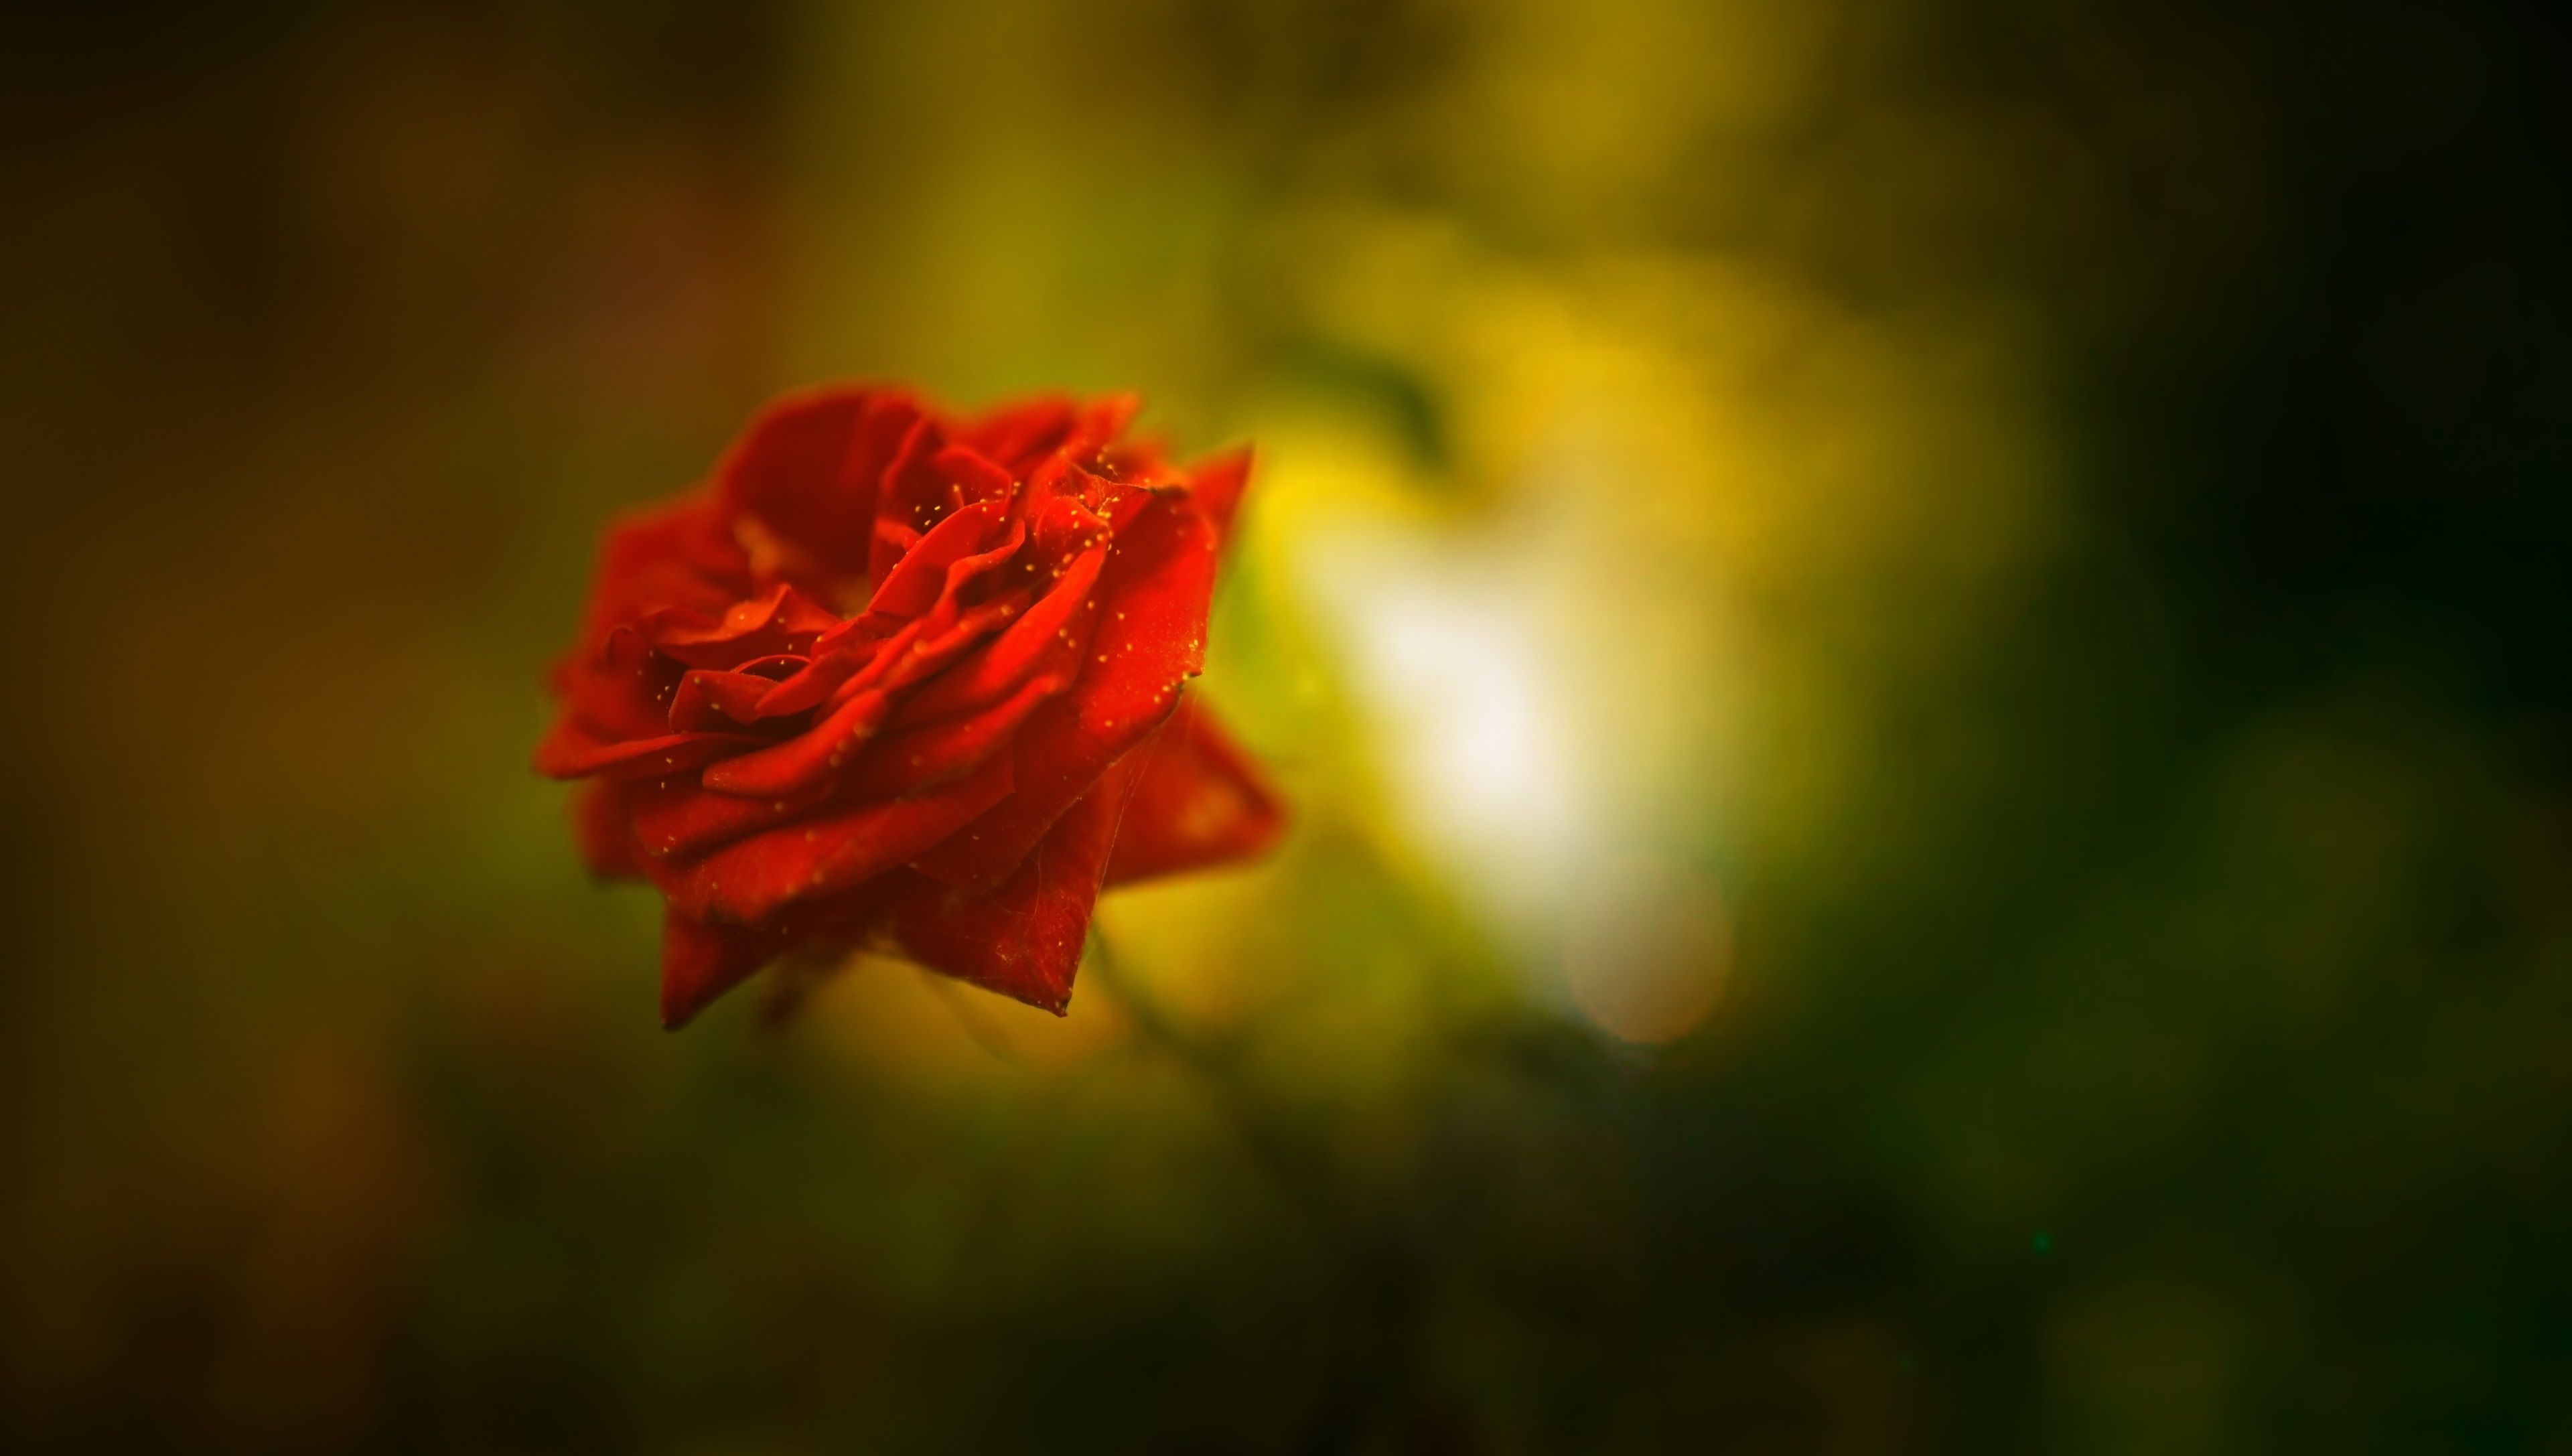 red rose 4k image and picture. Rose wallpaper, Beautiful roses, Rose